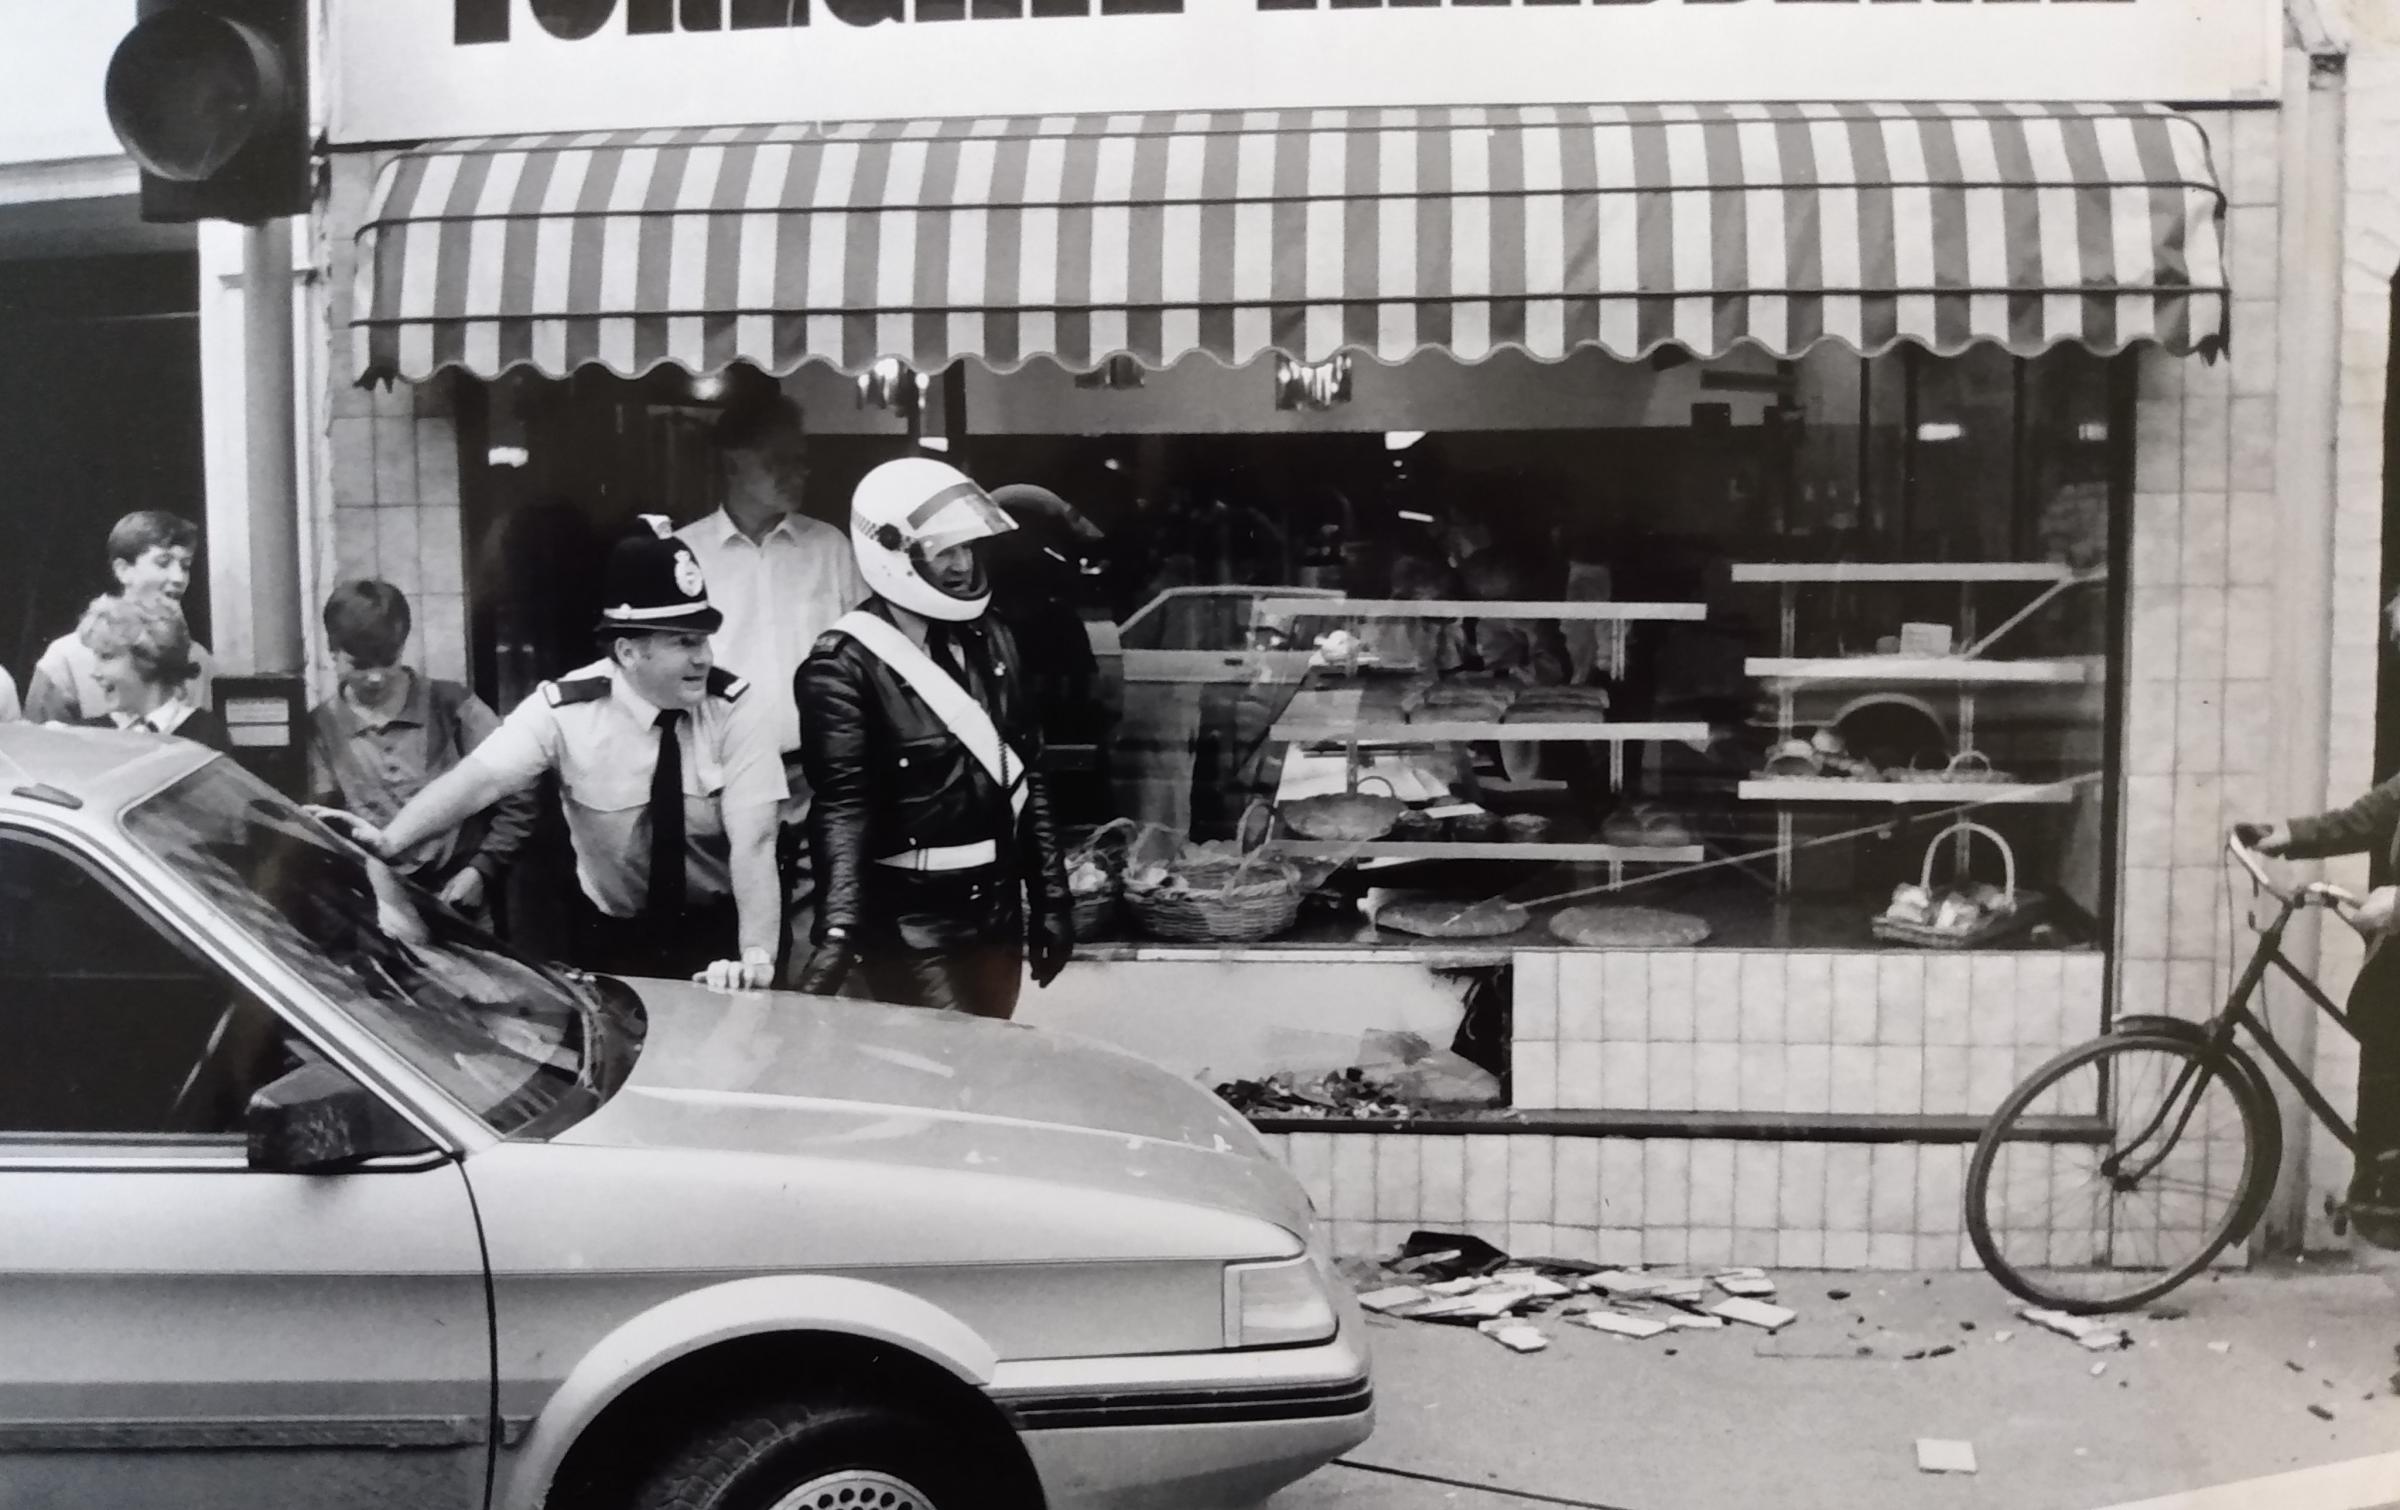 July 1987 and shoppers were forced to leap for their lives as an out-of-control Austin Montego crashed into the shop front of the Foregate Patisserie in St John’s. Four men were taken from the car and later helping police with their enquiries